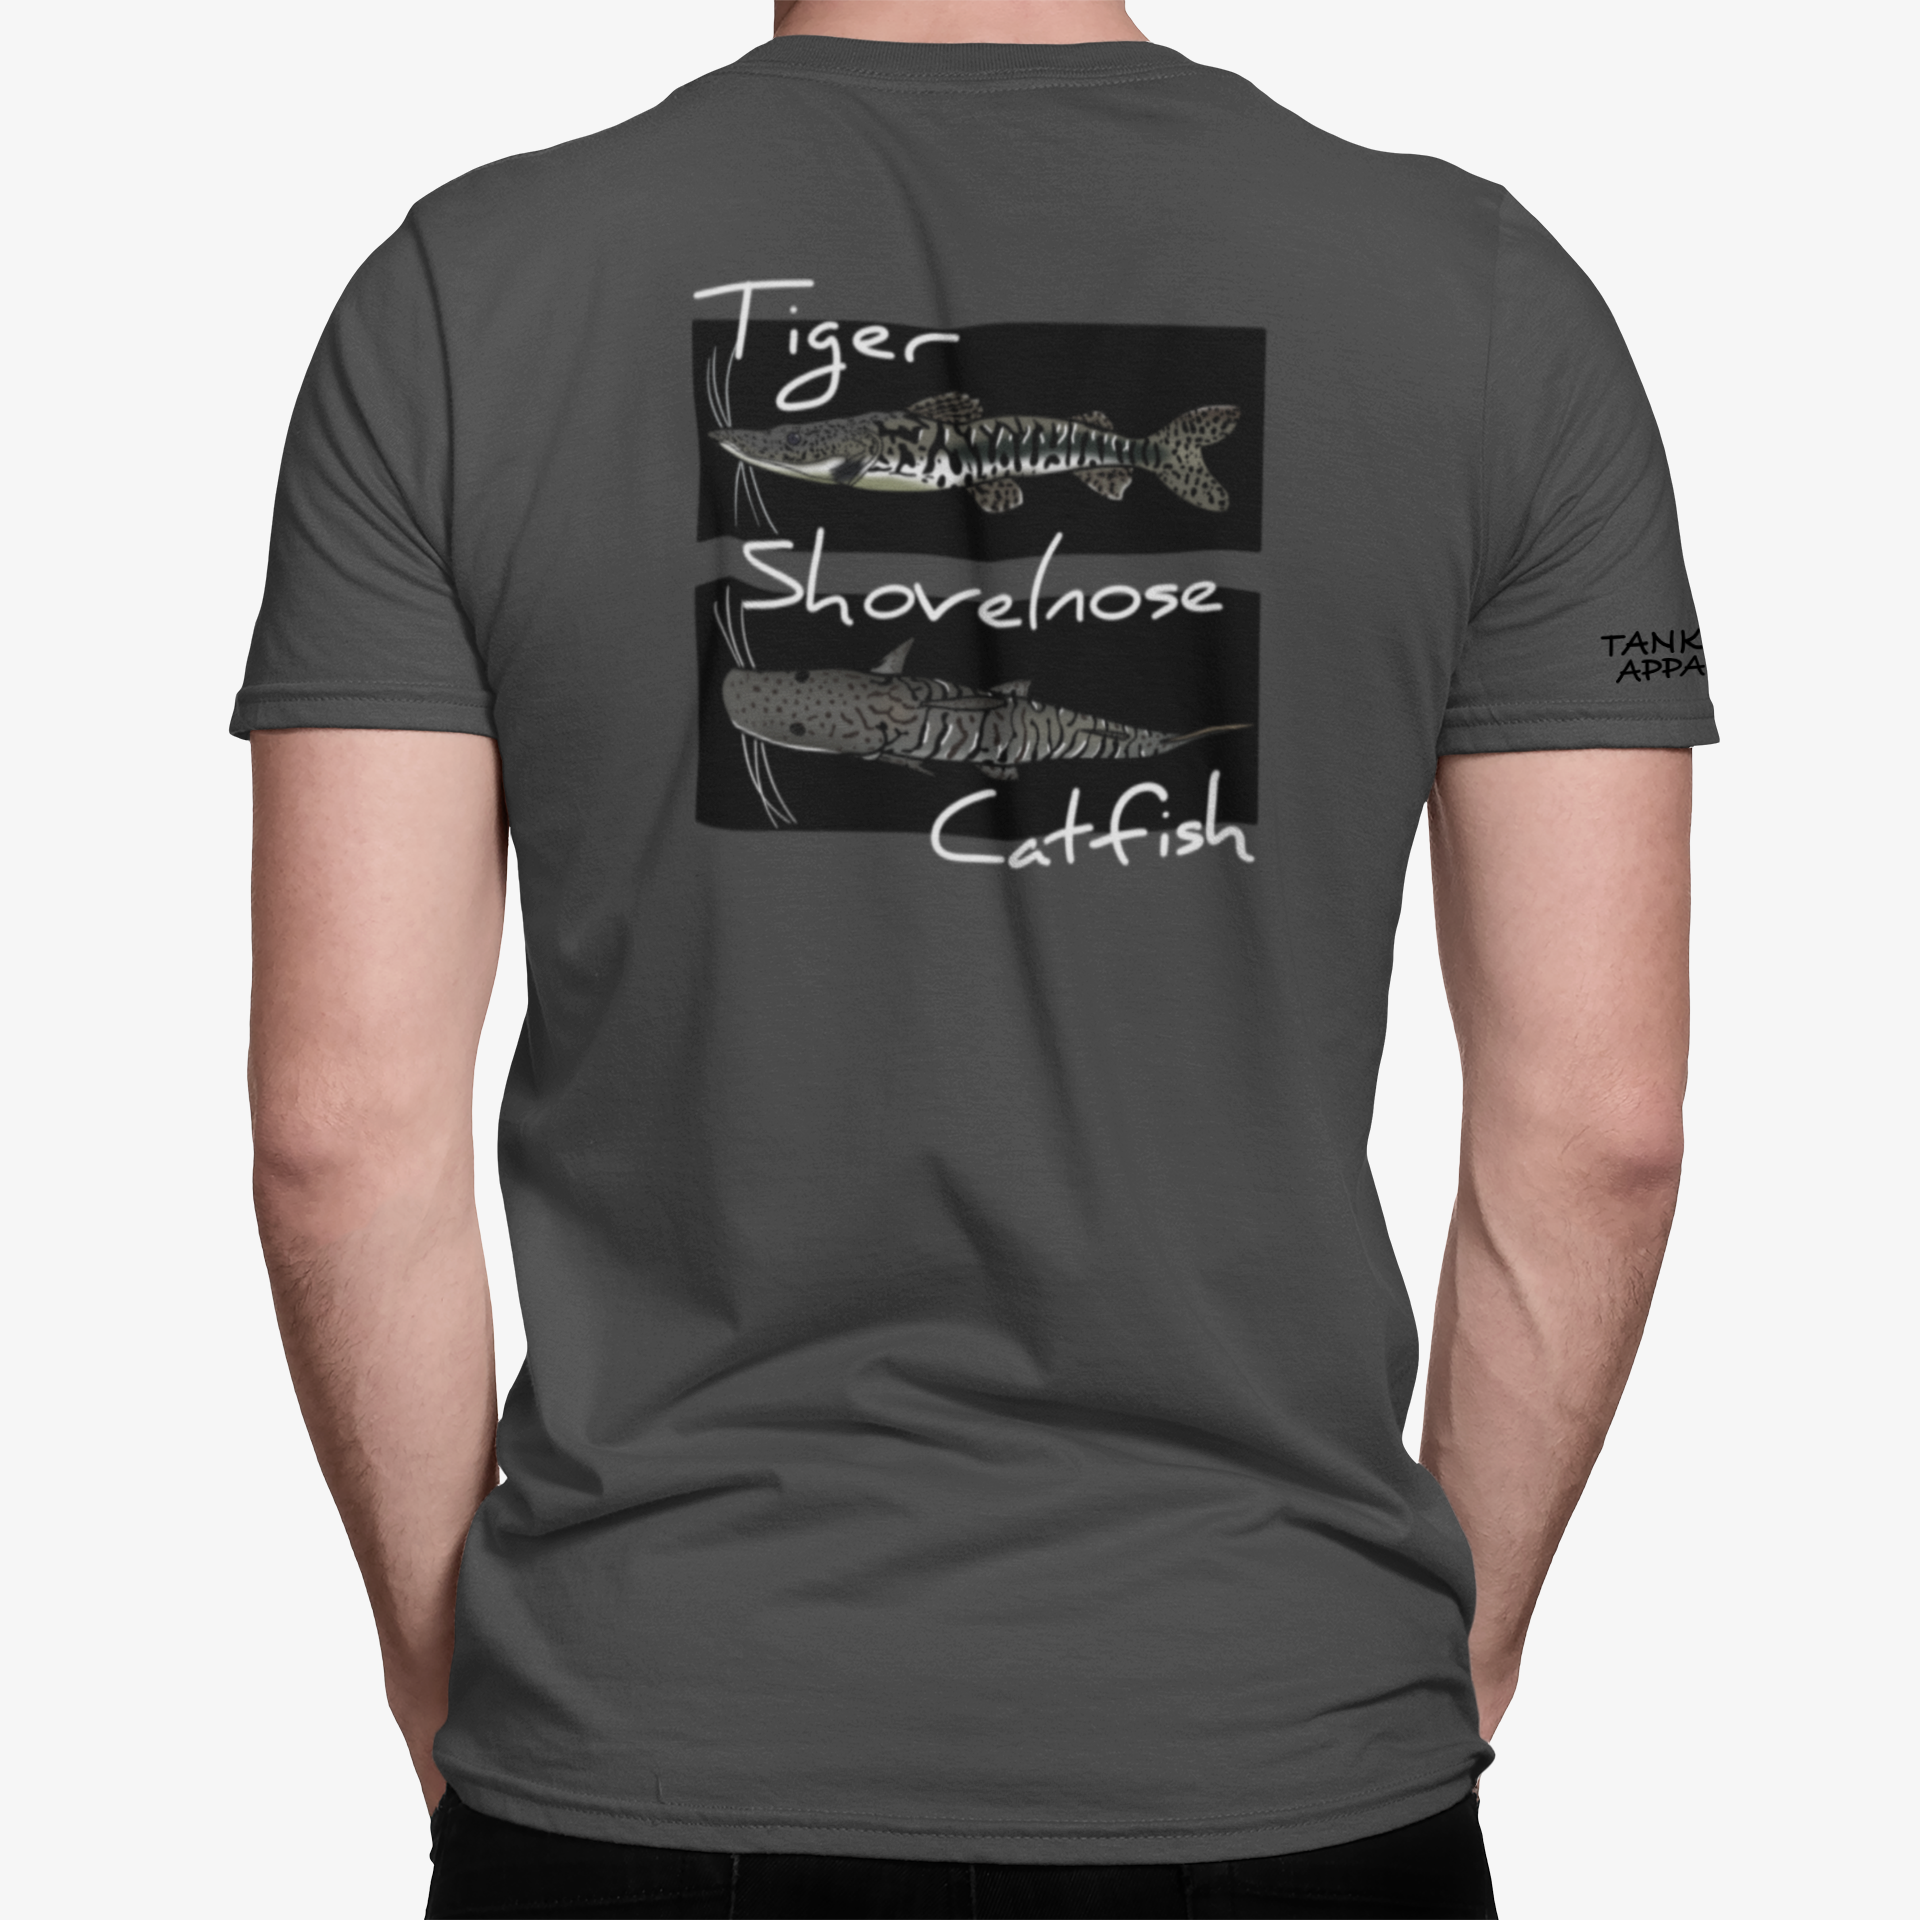 The Tank Life Apparel tiger shovelnose catfish design on an athletic dri fit performance shirt. Gray catfish with stripes.